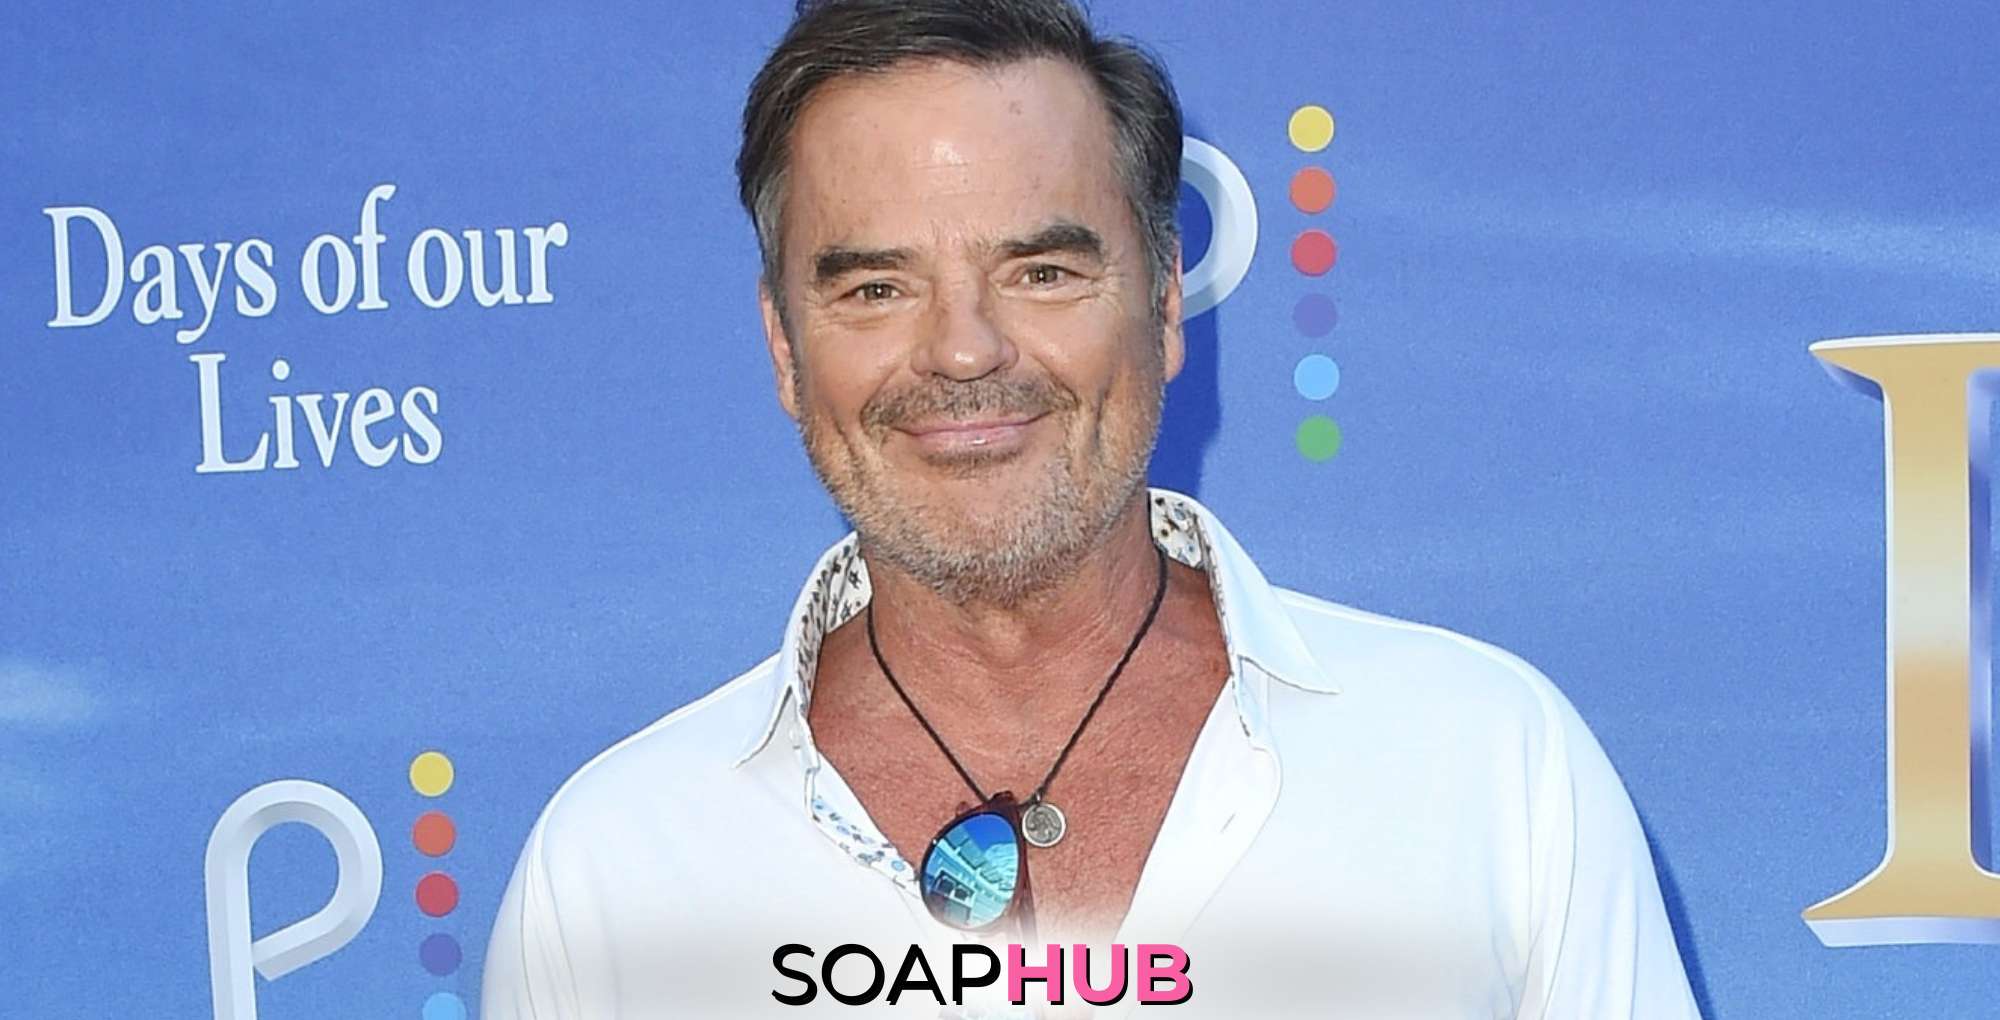 Days of Our Lives' Wally Kurth with the Soap Hub logo across the bottom.